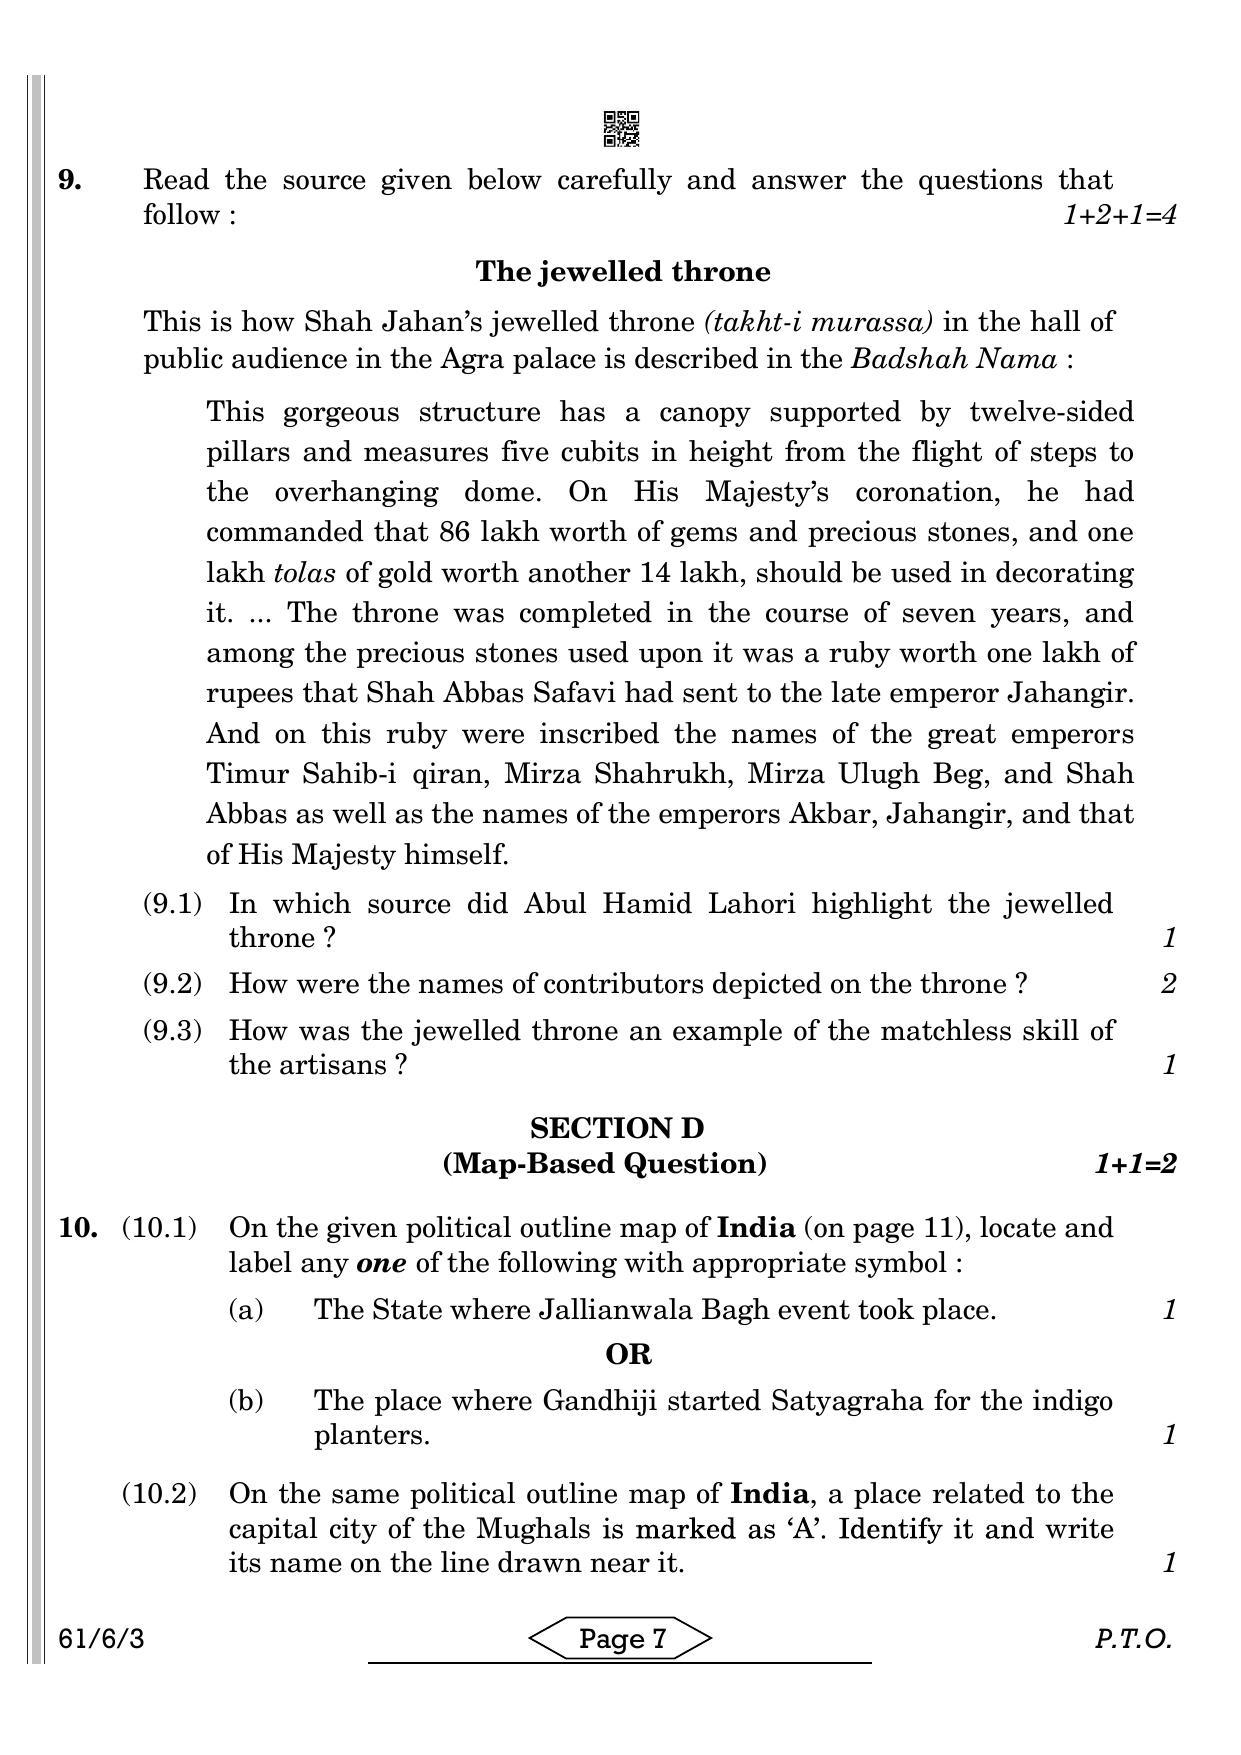 CBSE Class 12 61-6-3 HISTORY 2022 Compartment Question Paper - Page 7